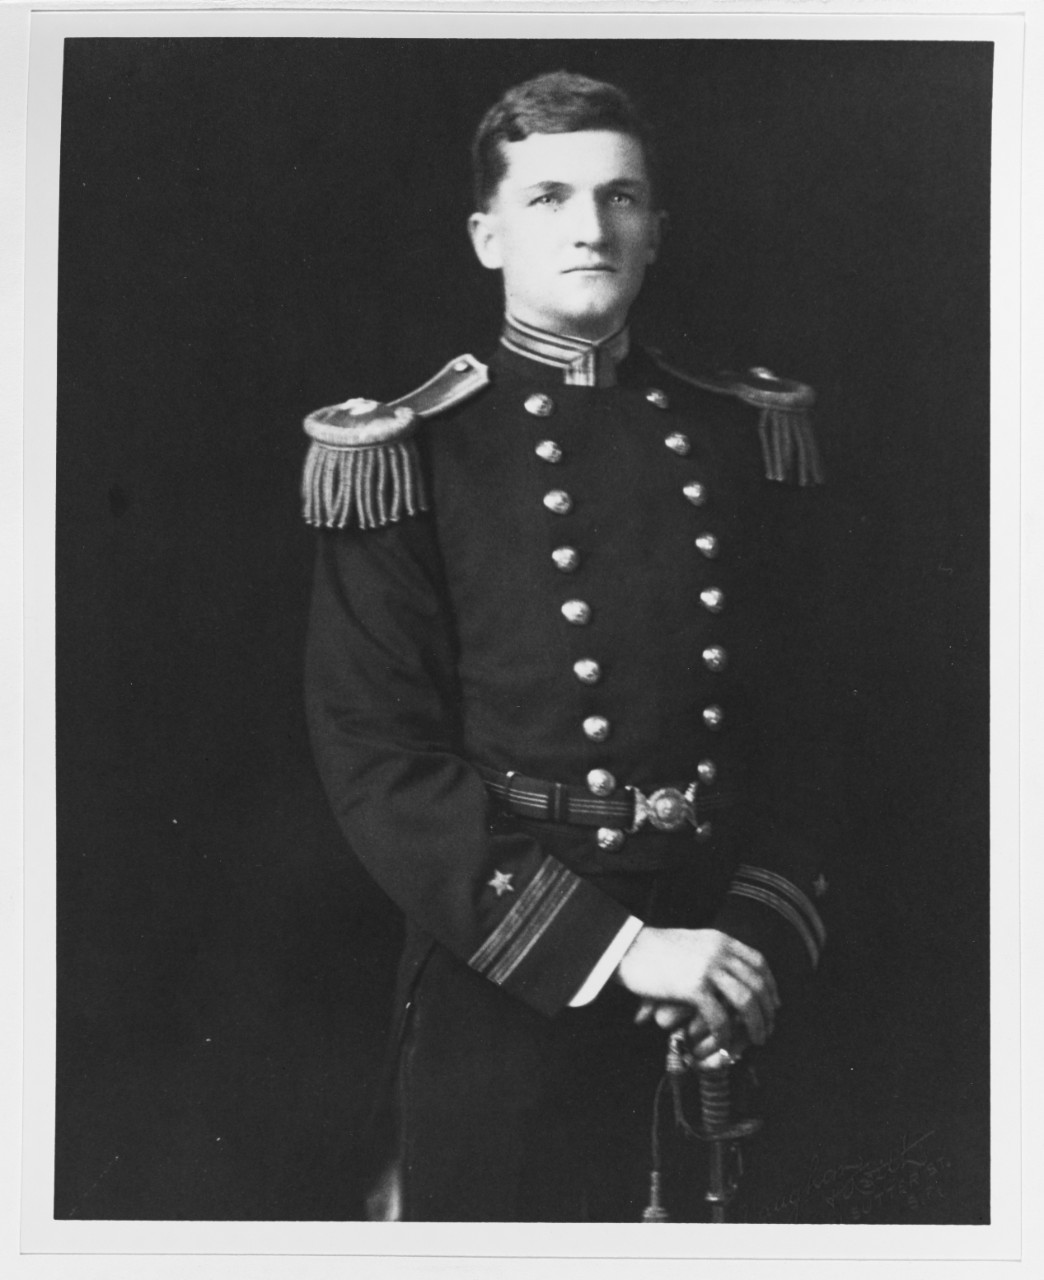 A portrait photograph captures a youthful Stark, probably taken when his ship, Minnesota, visits San Francisco, Calif., in 1908, during the Great White Fleet’s World cruise. Photographed by Vaughan & Keith of San Francisco. (Collection of Adm. Harold R. Stark. U.S. Navy Photograph NH 93275, Photographic Section, Naval History and Heritage Command).